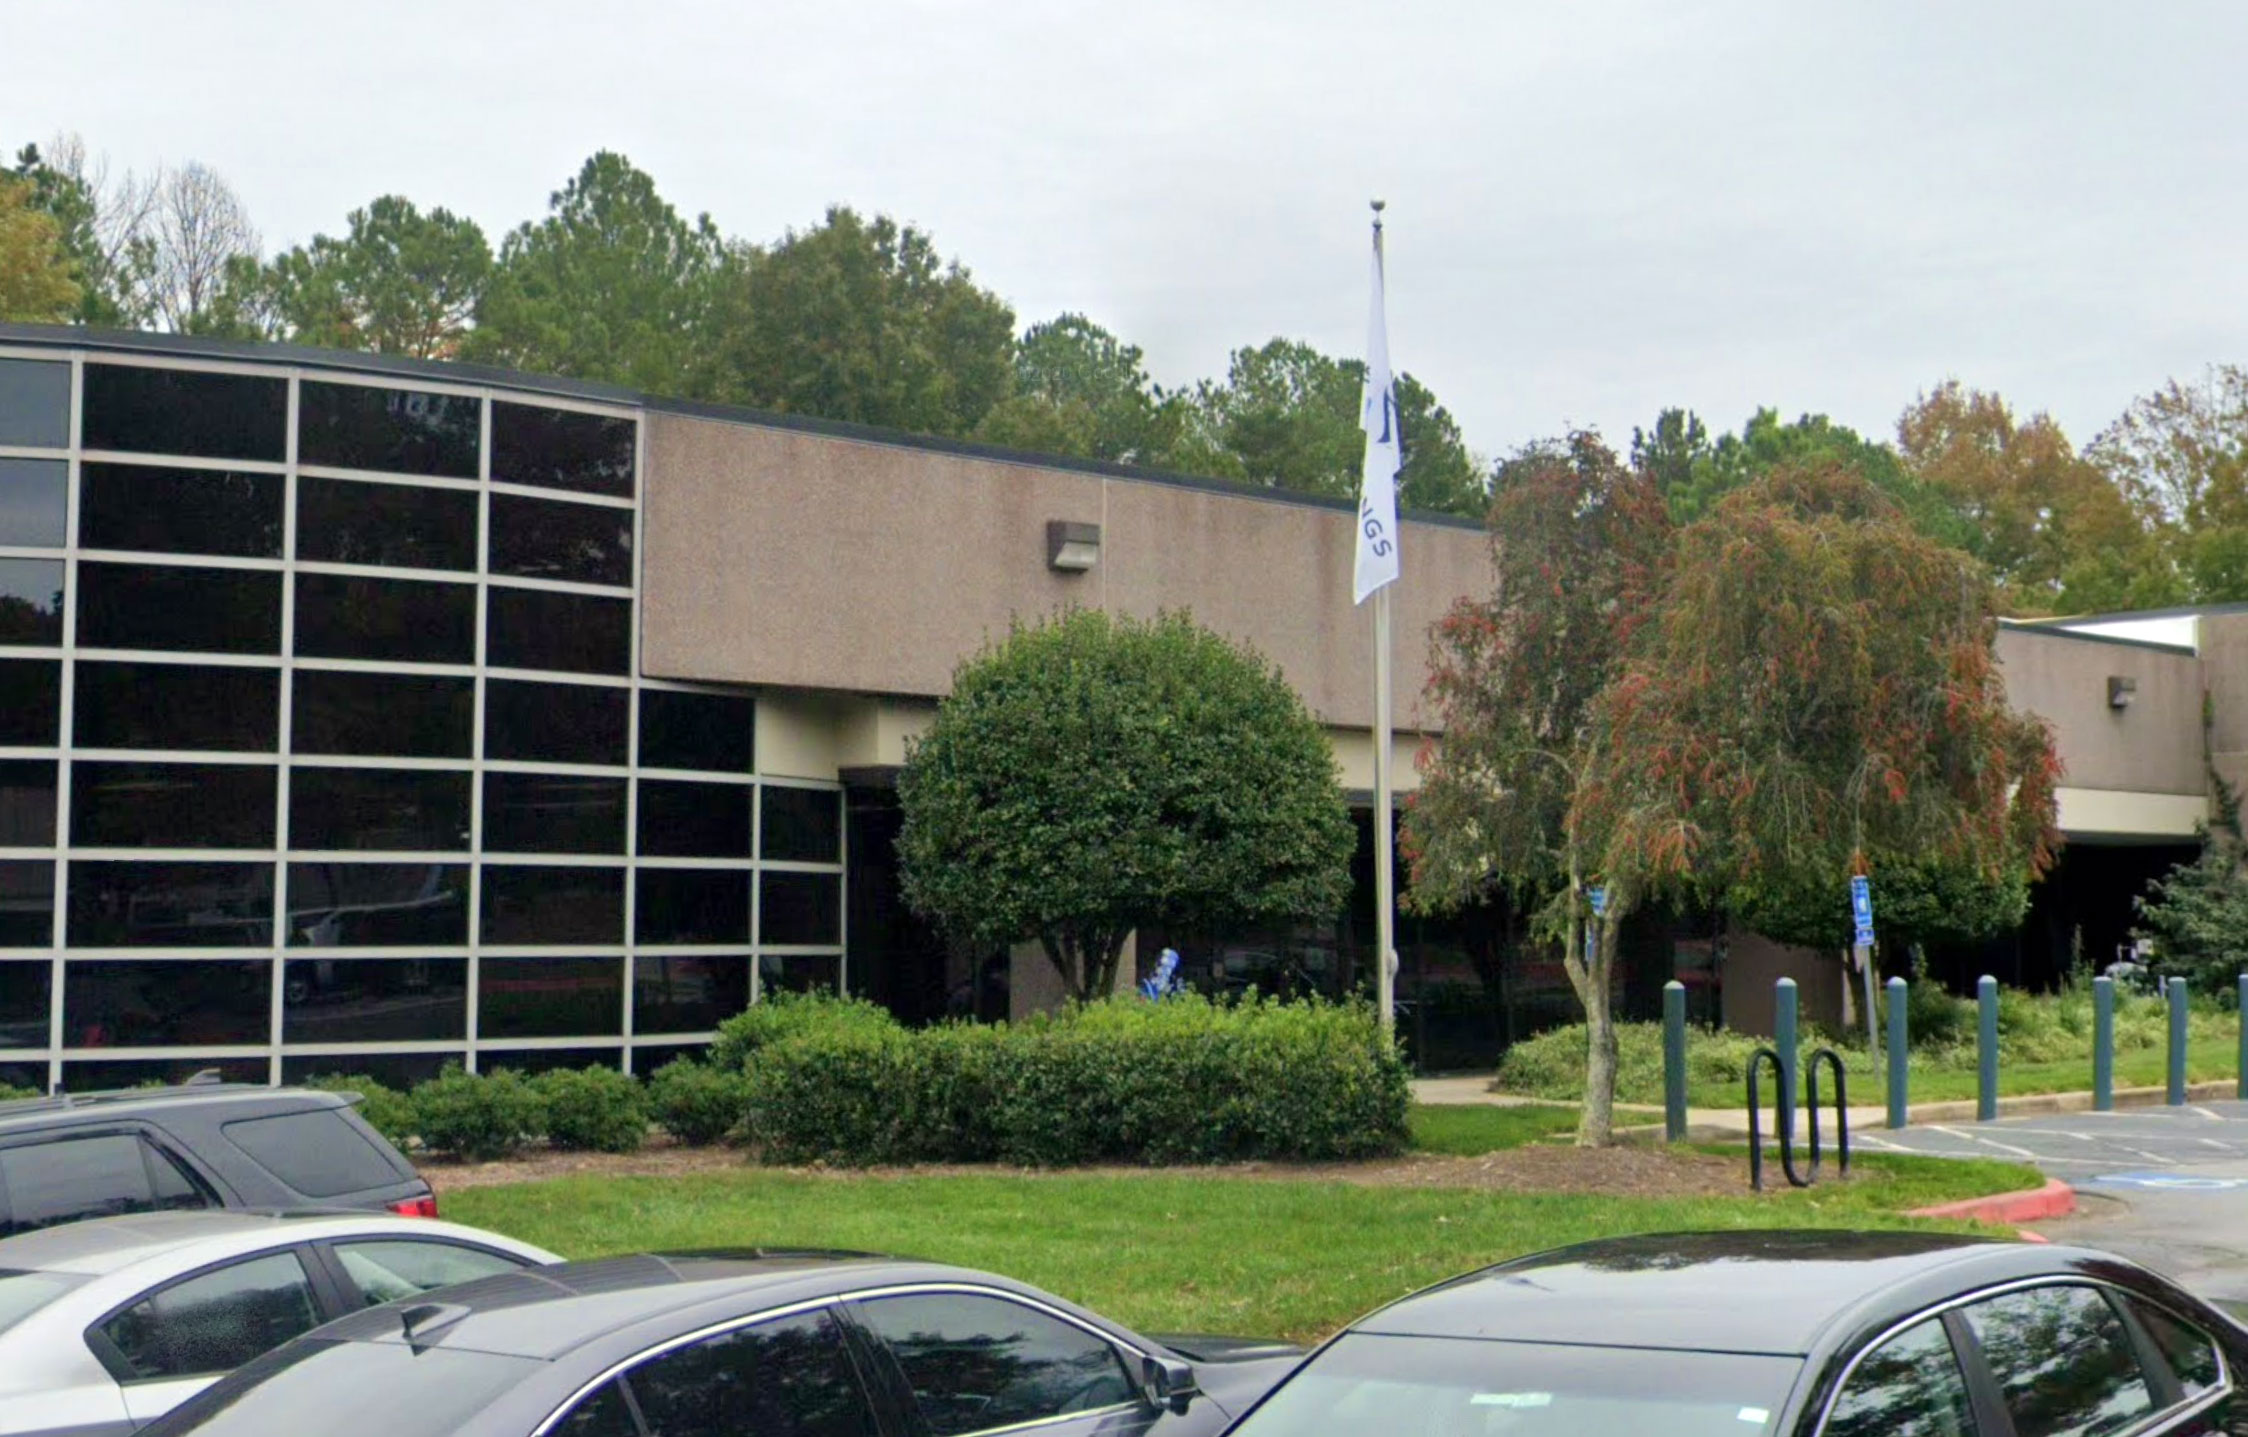 Sandy Springs Municipal Court viewed from the street